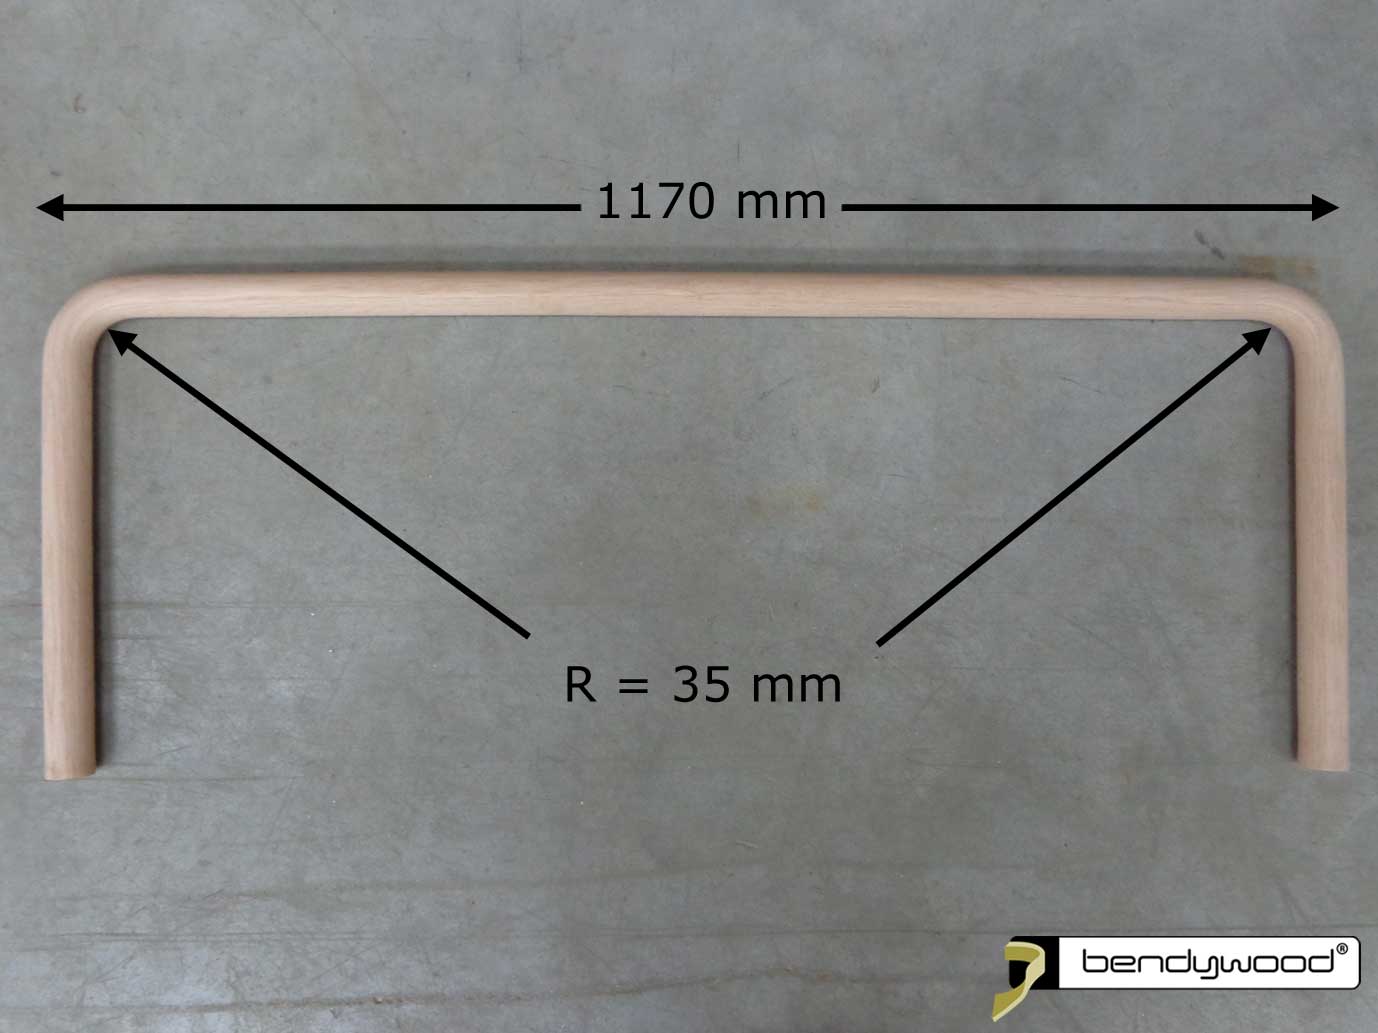 90° angle with radius 35 mm in Bendywood® lamellas